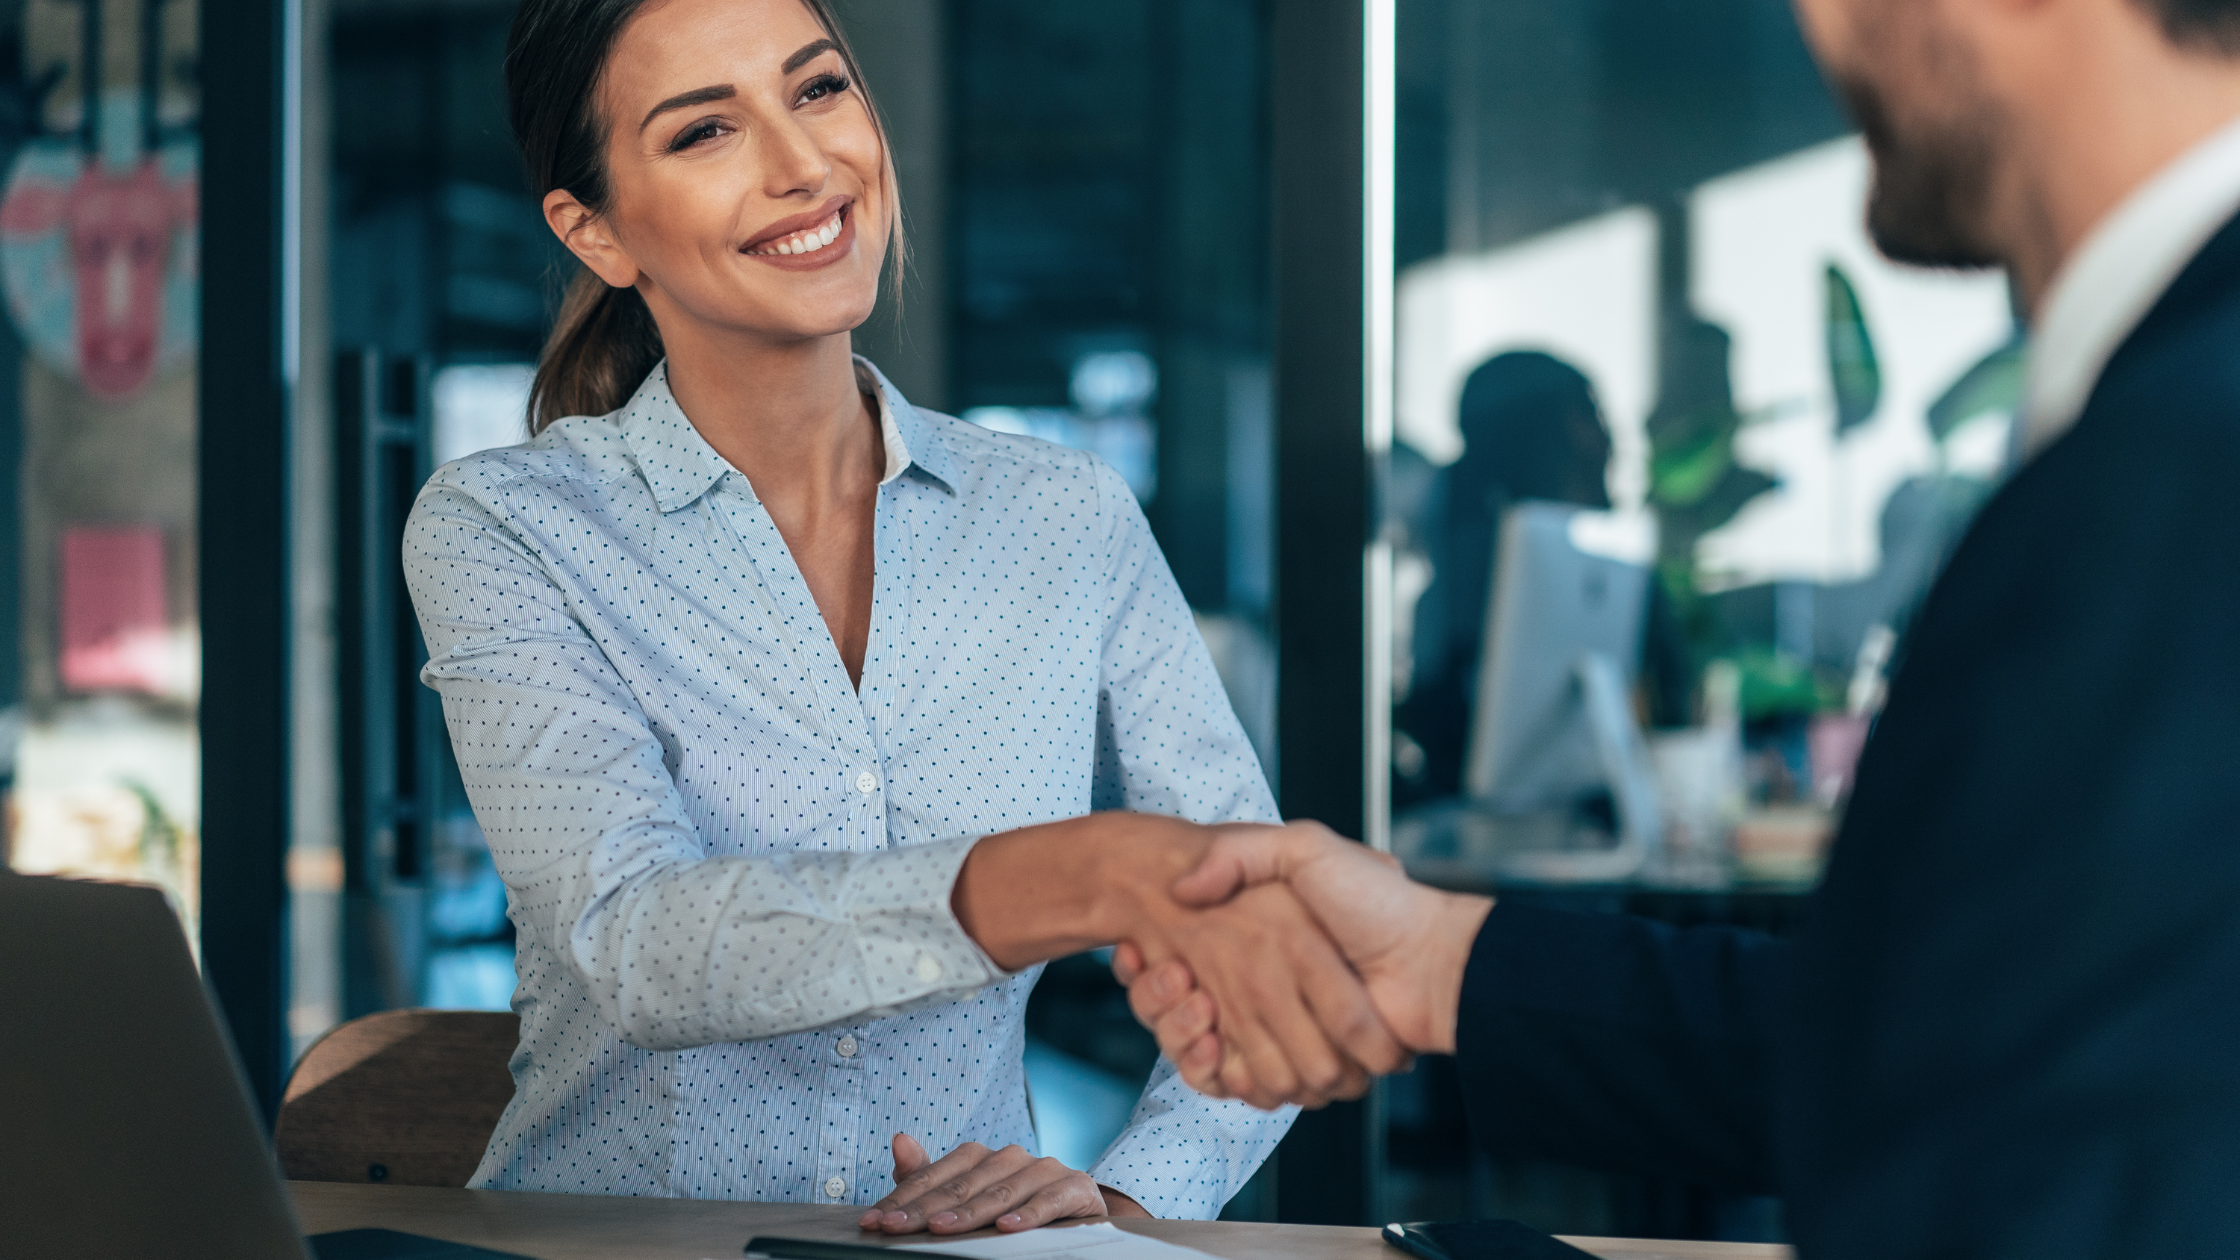 Shaking hands after business deal -  Choosing The Best Deal For Your Business -  The Tampa Business Broker 